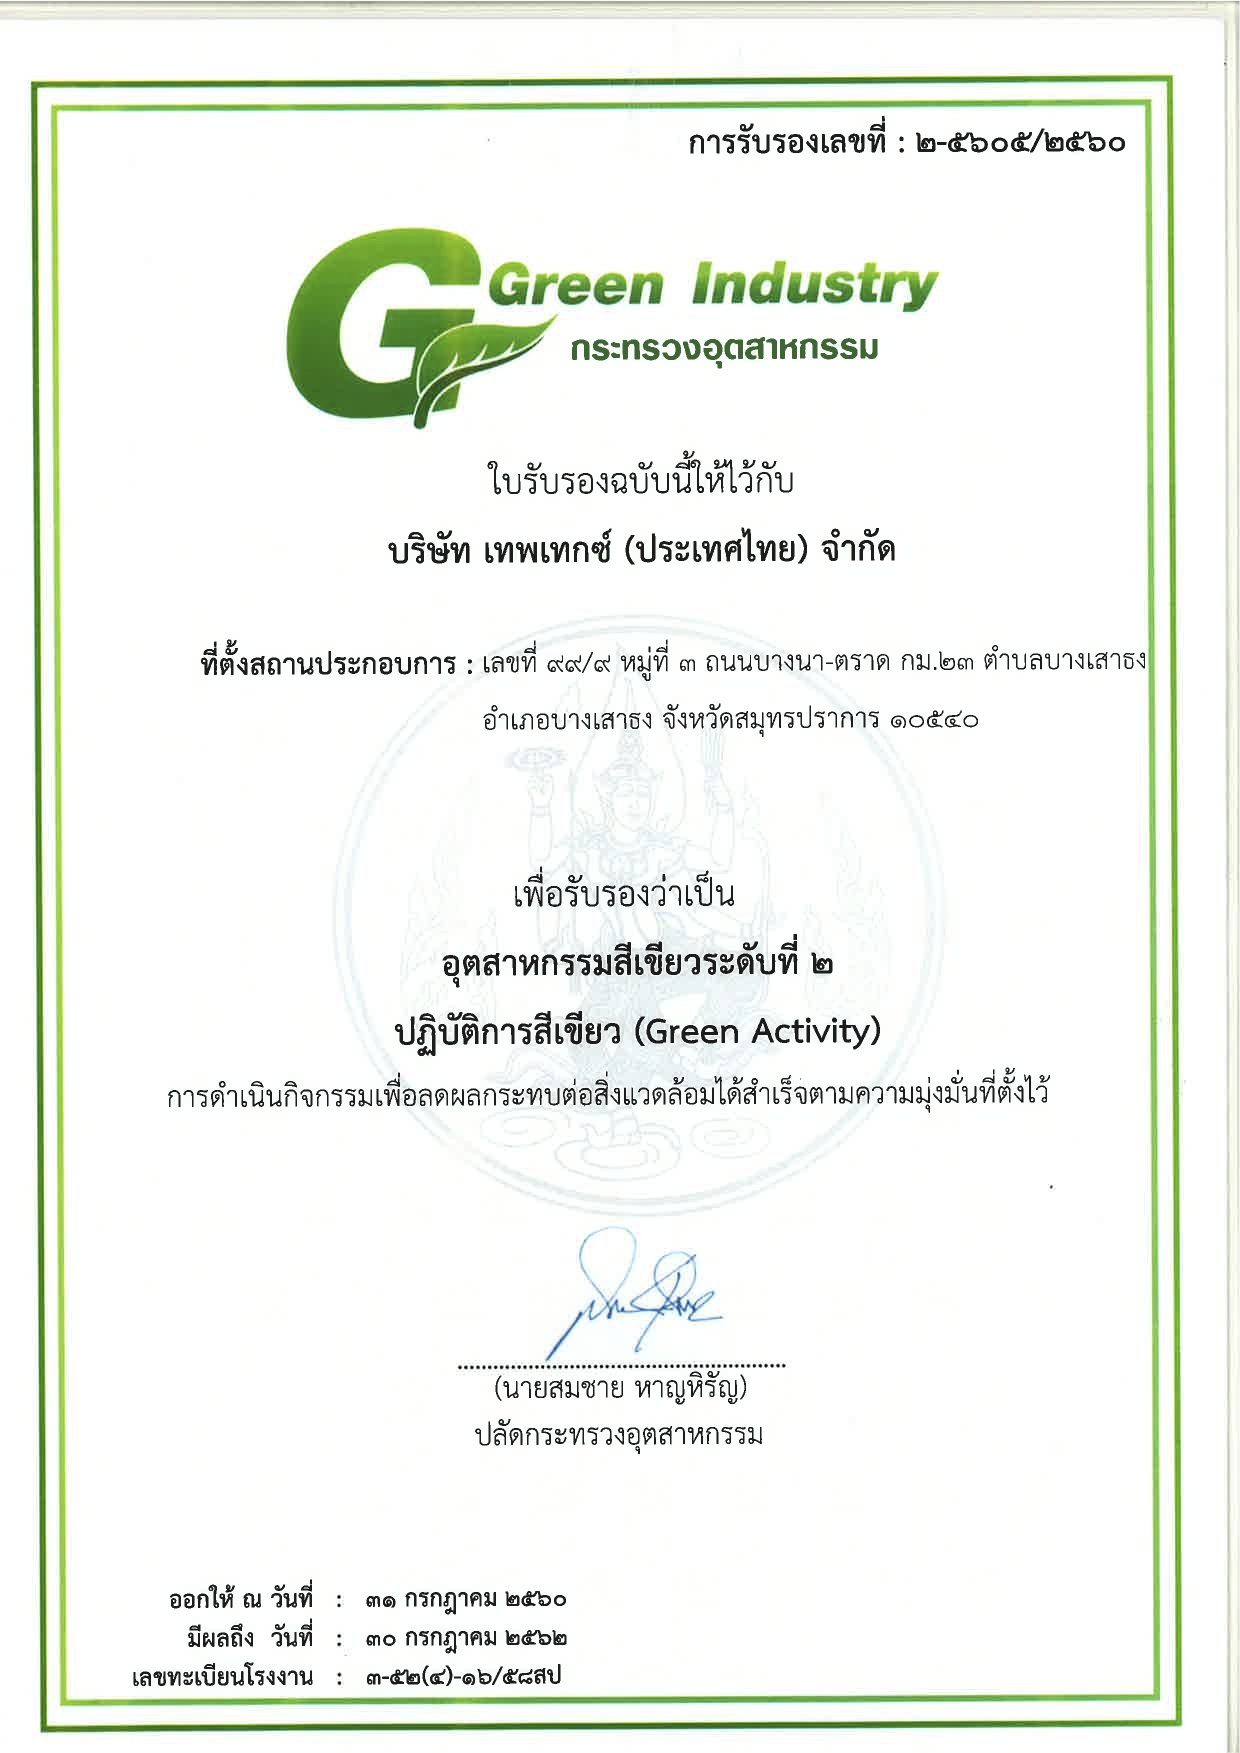 Our green certifications at a glance